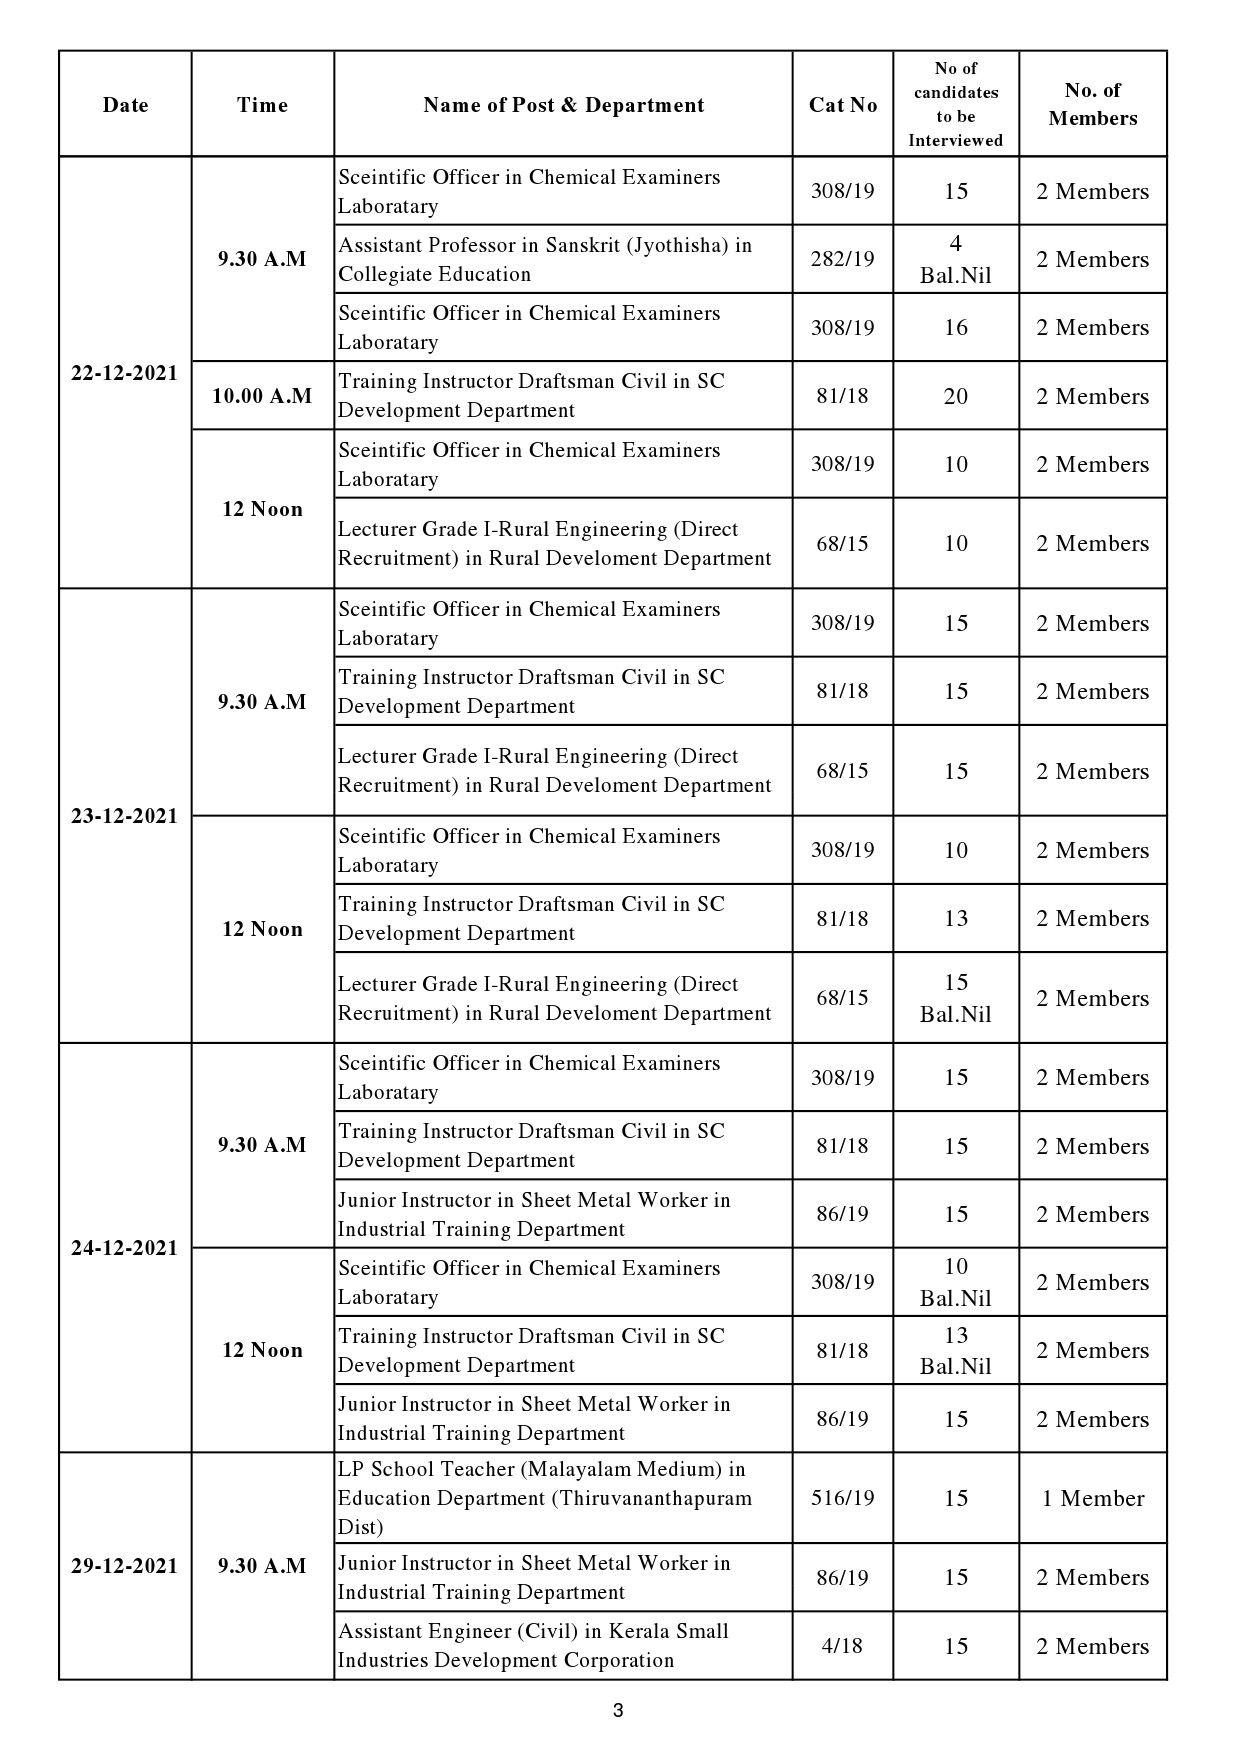 KPSC Revised Interview Programme For The Month Of December 2021 - Notification Image 3